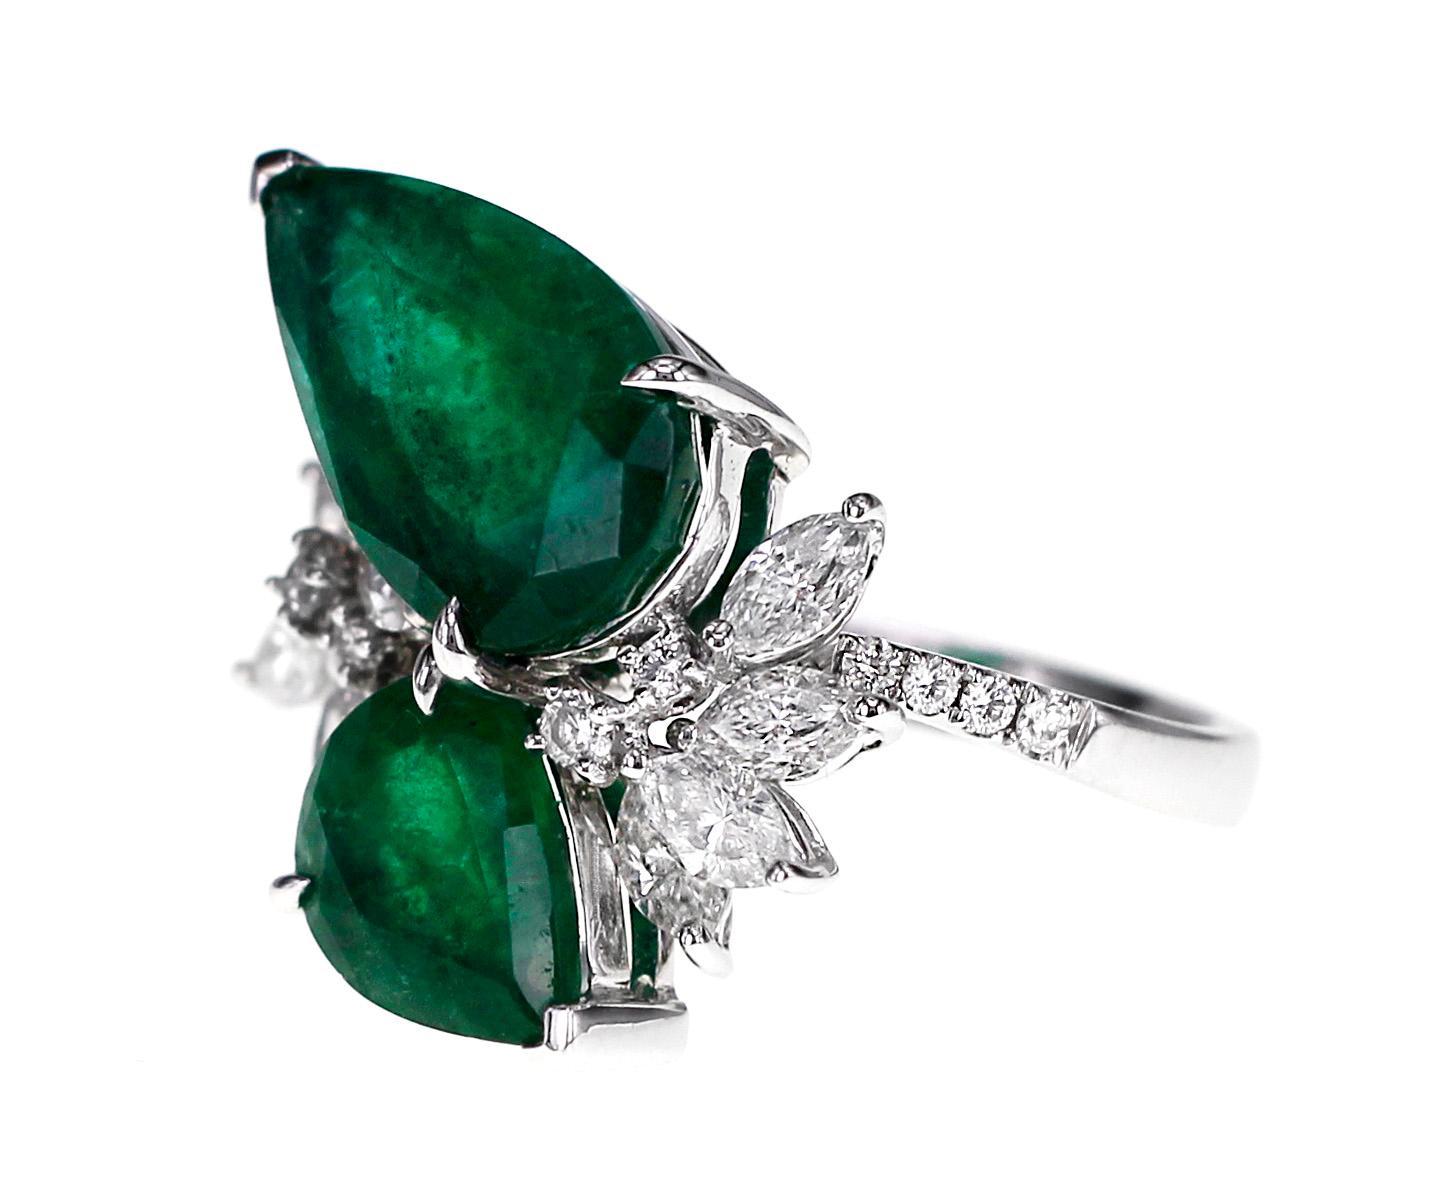 6.67 carats of Vivid green emeralds are set along with 1.35 carat of white brilliant diamonds. Hand picked F color and VS clarity diamonds are set along with this deep saturation emeralds.
Ring Size: US 6.25